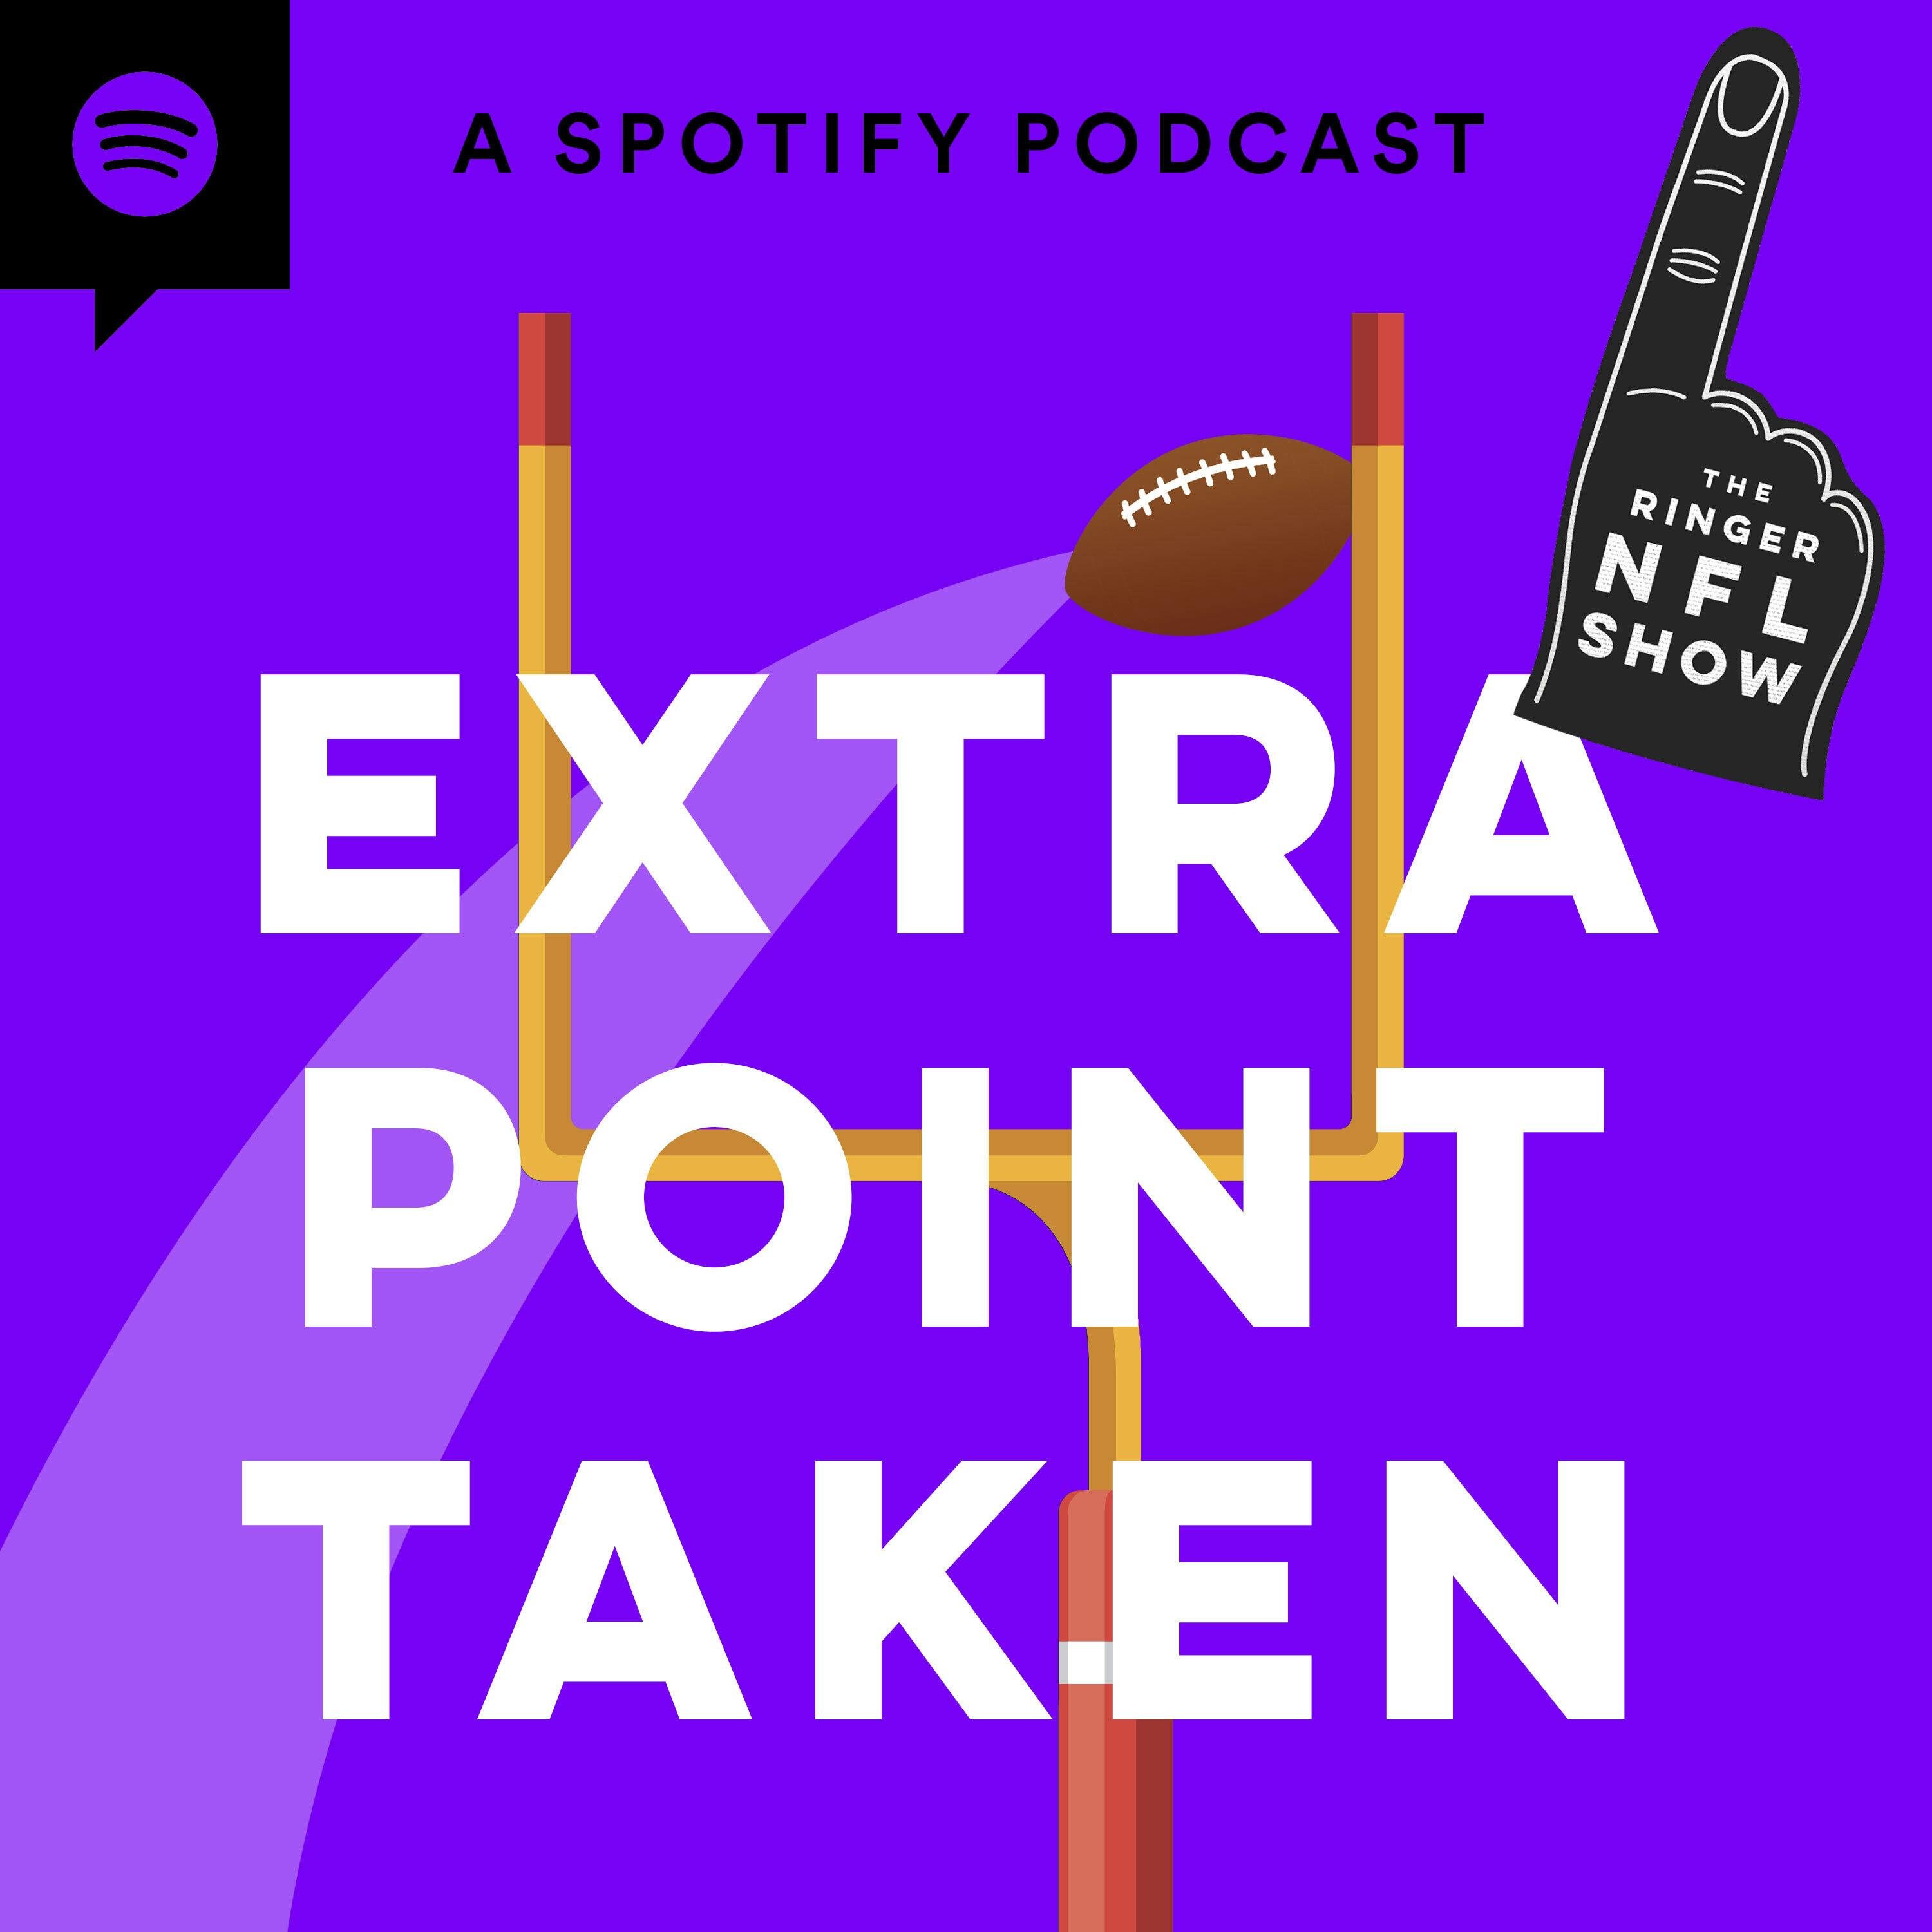 The Confusing Brian Burns Trade, Kirk Cousins's Fit With the Falcons, and Much More! | Extra Point Taken